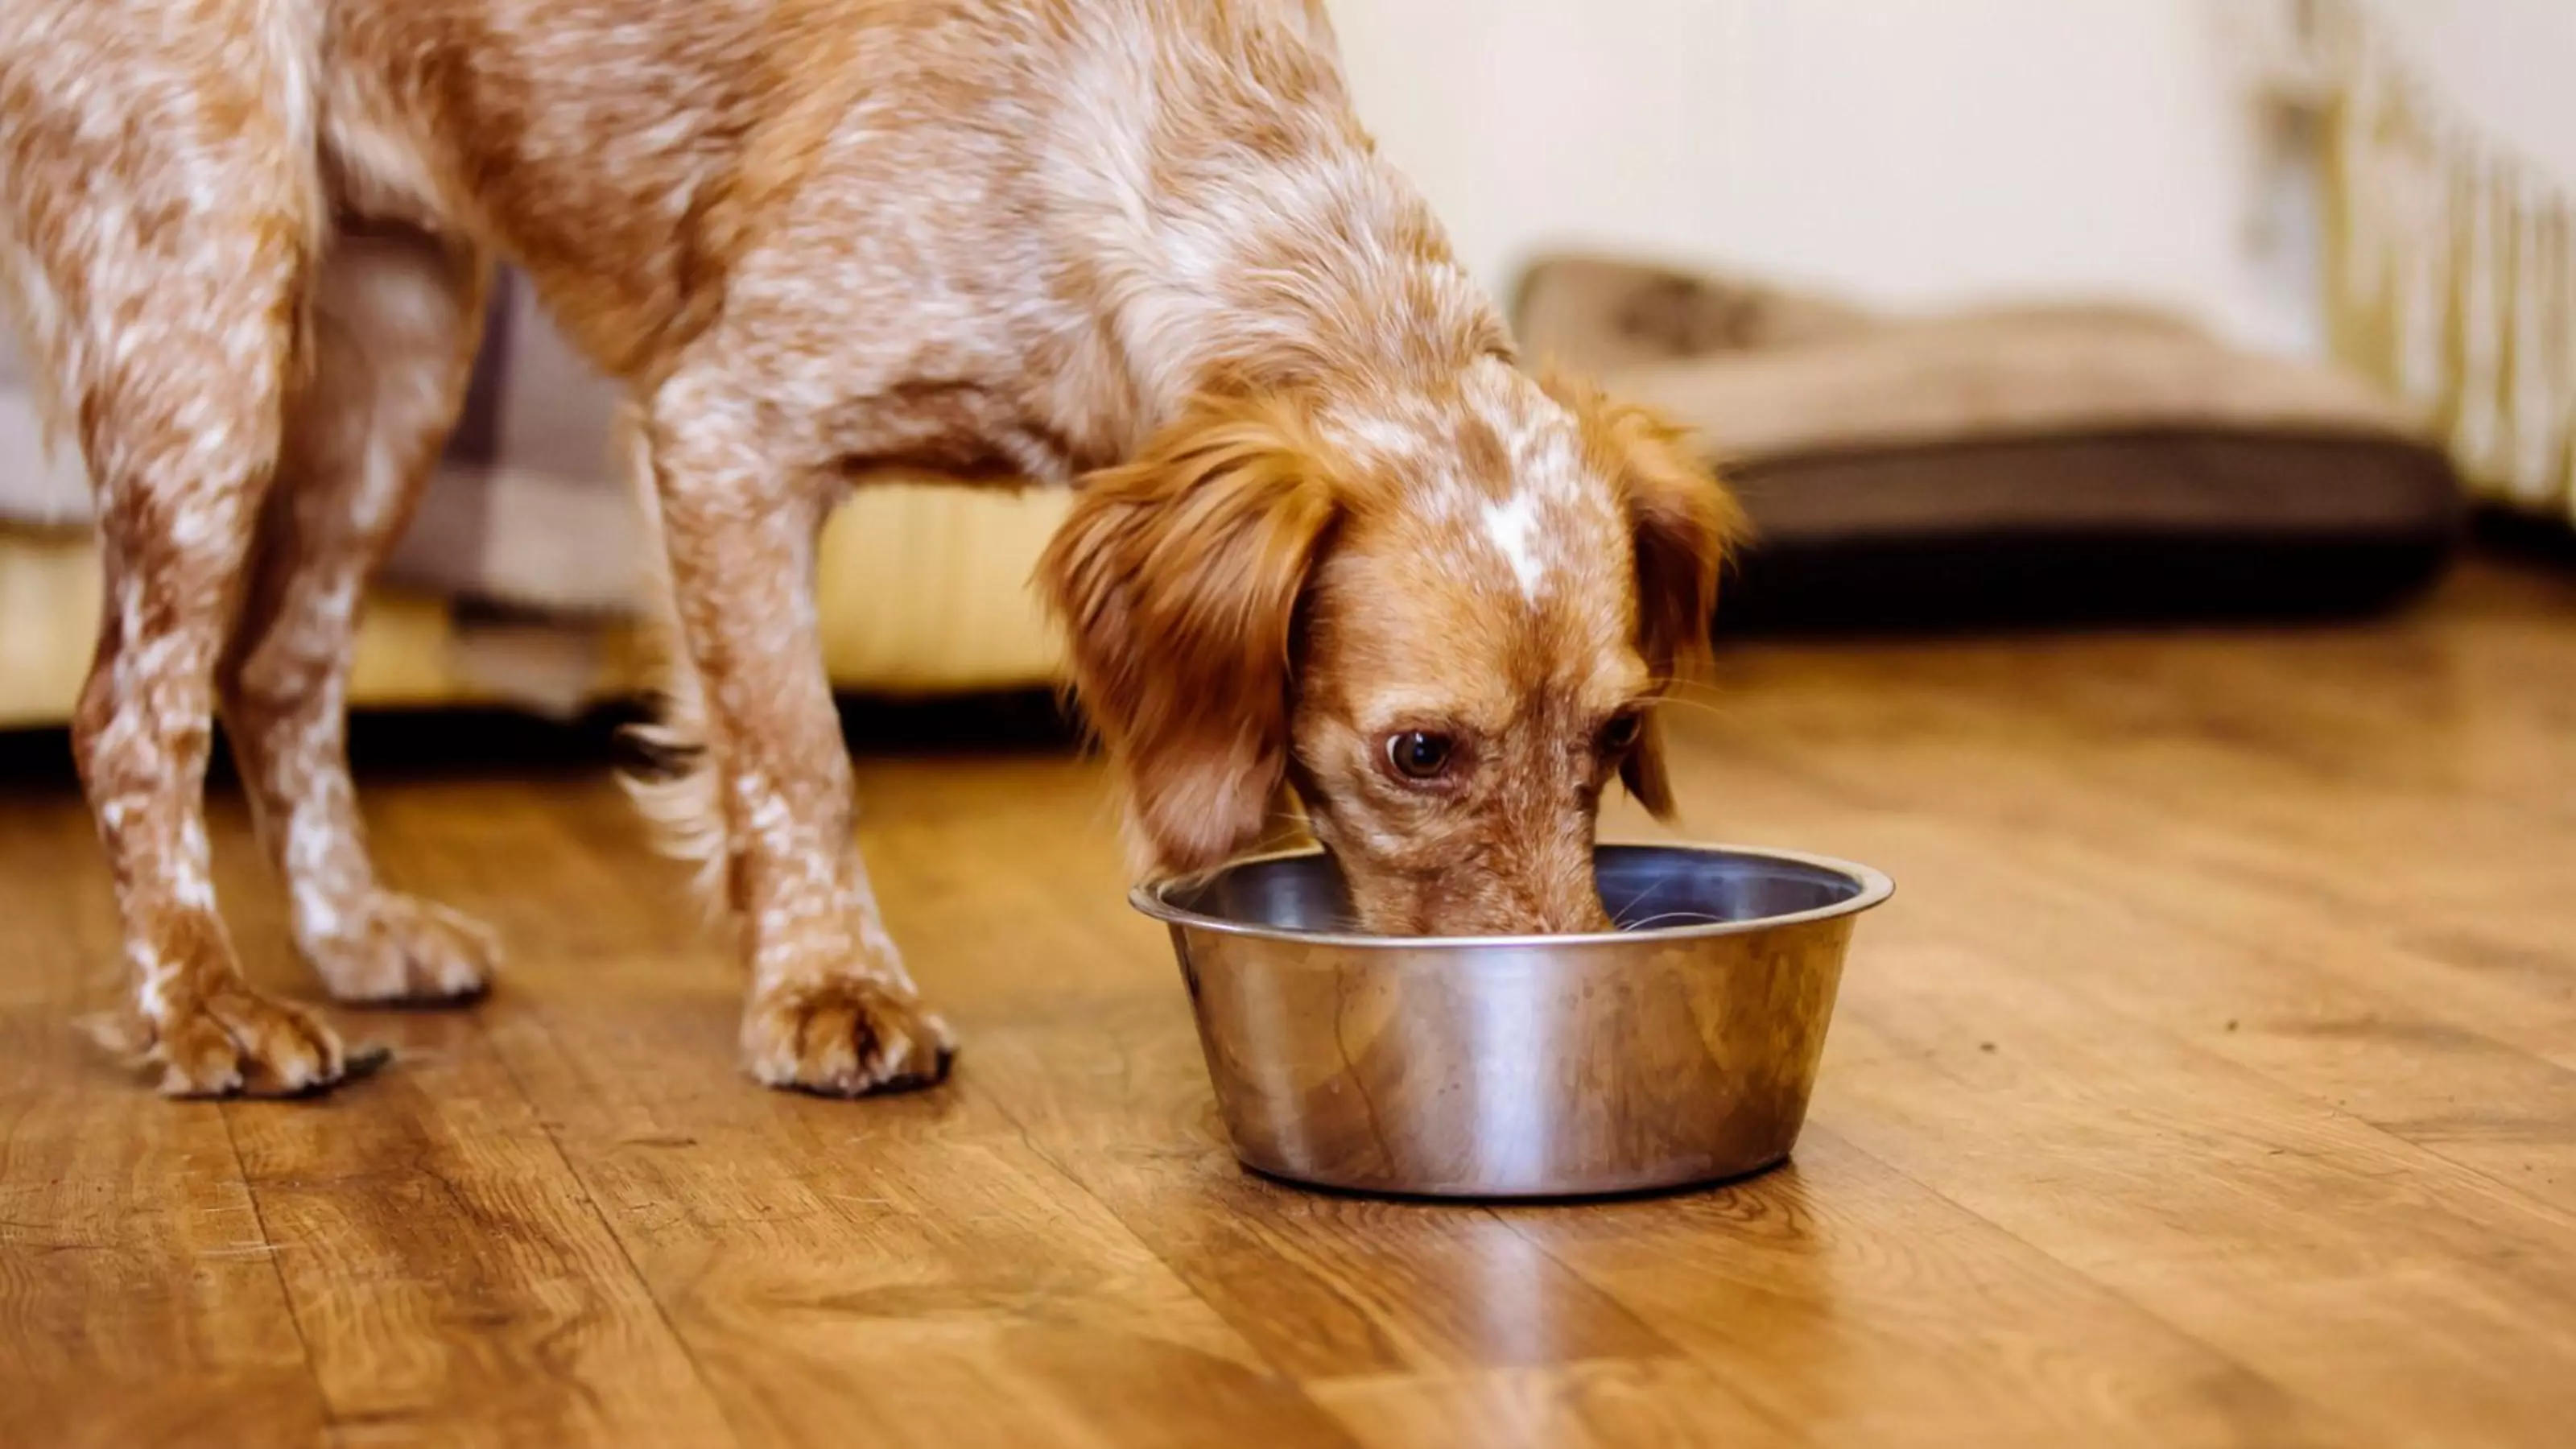 A dog eating a bland diet from a bowl.